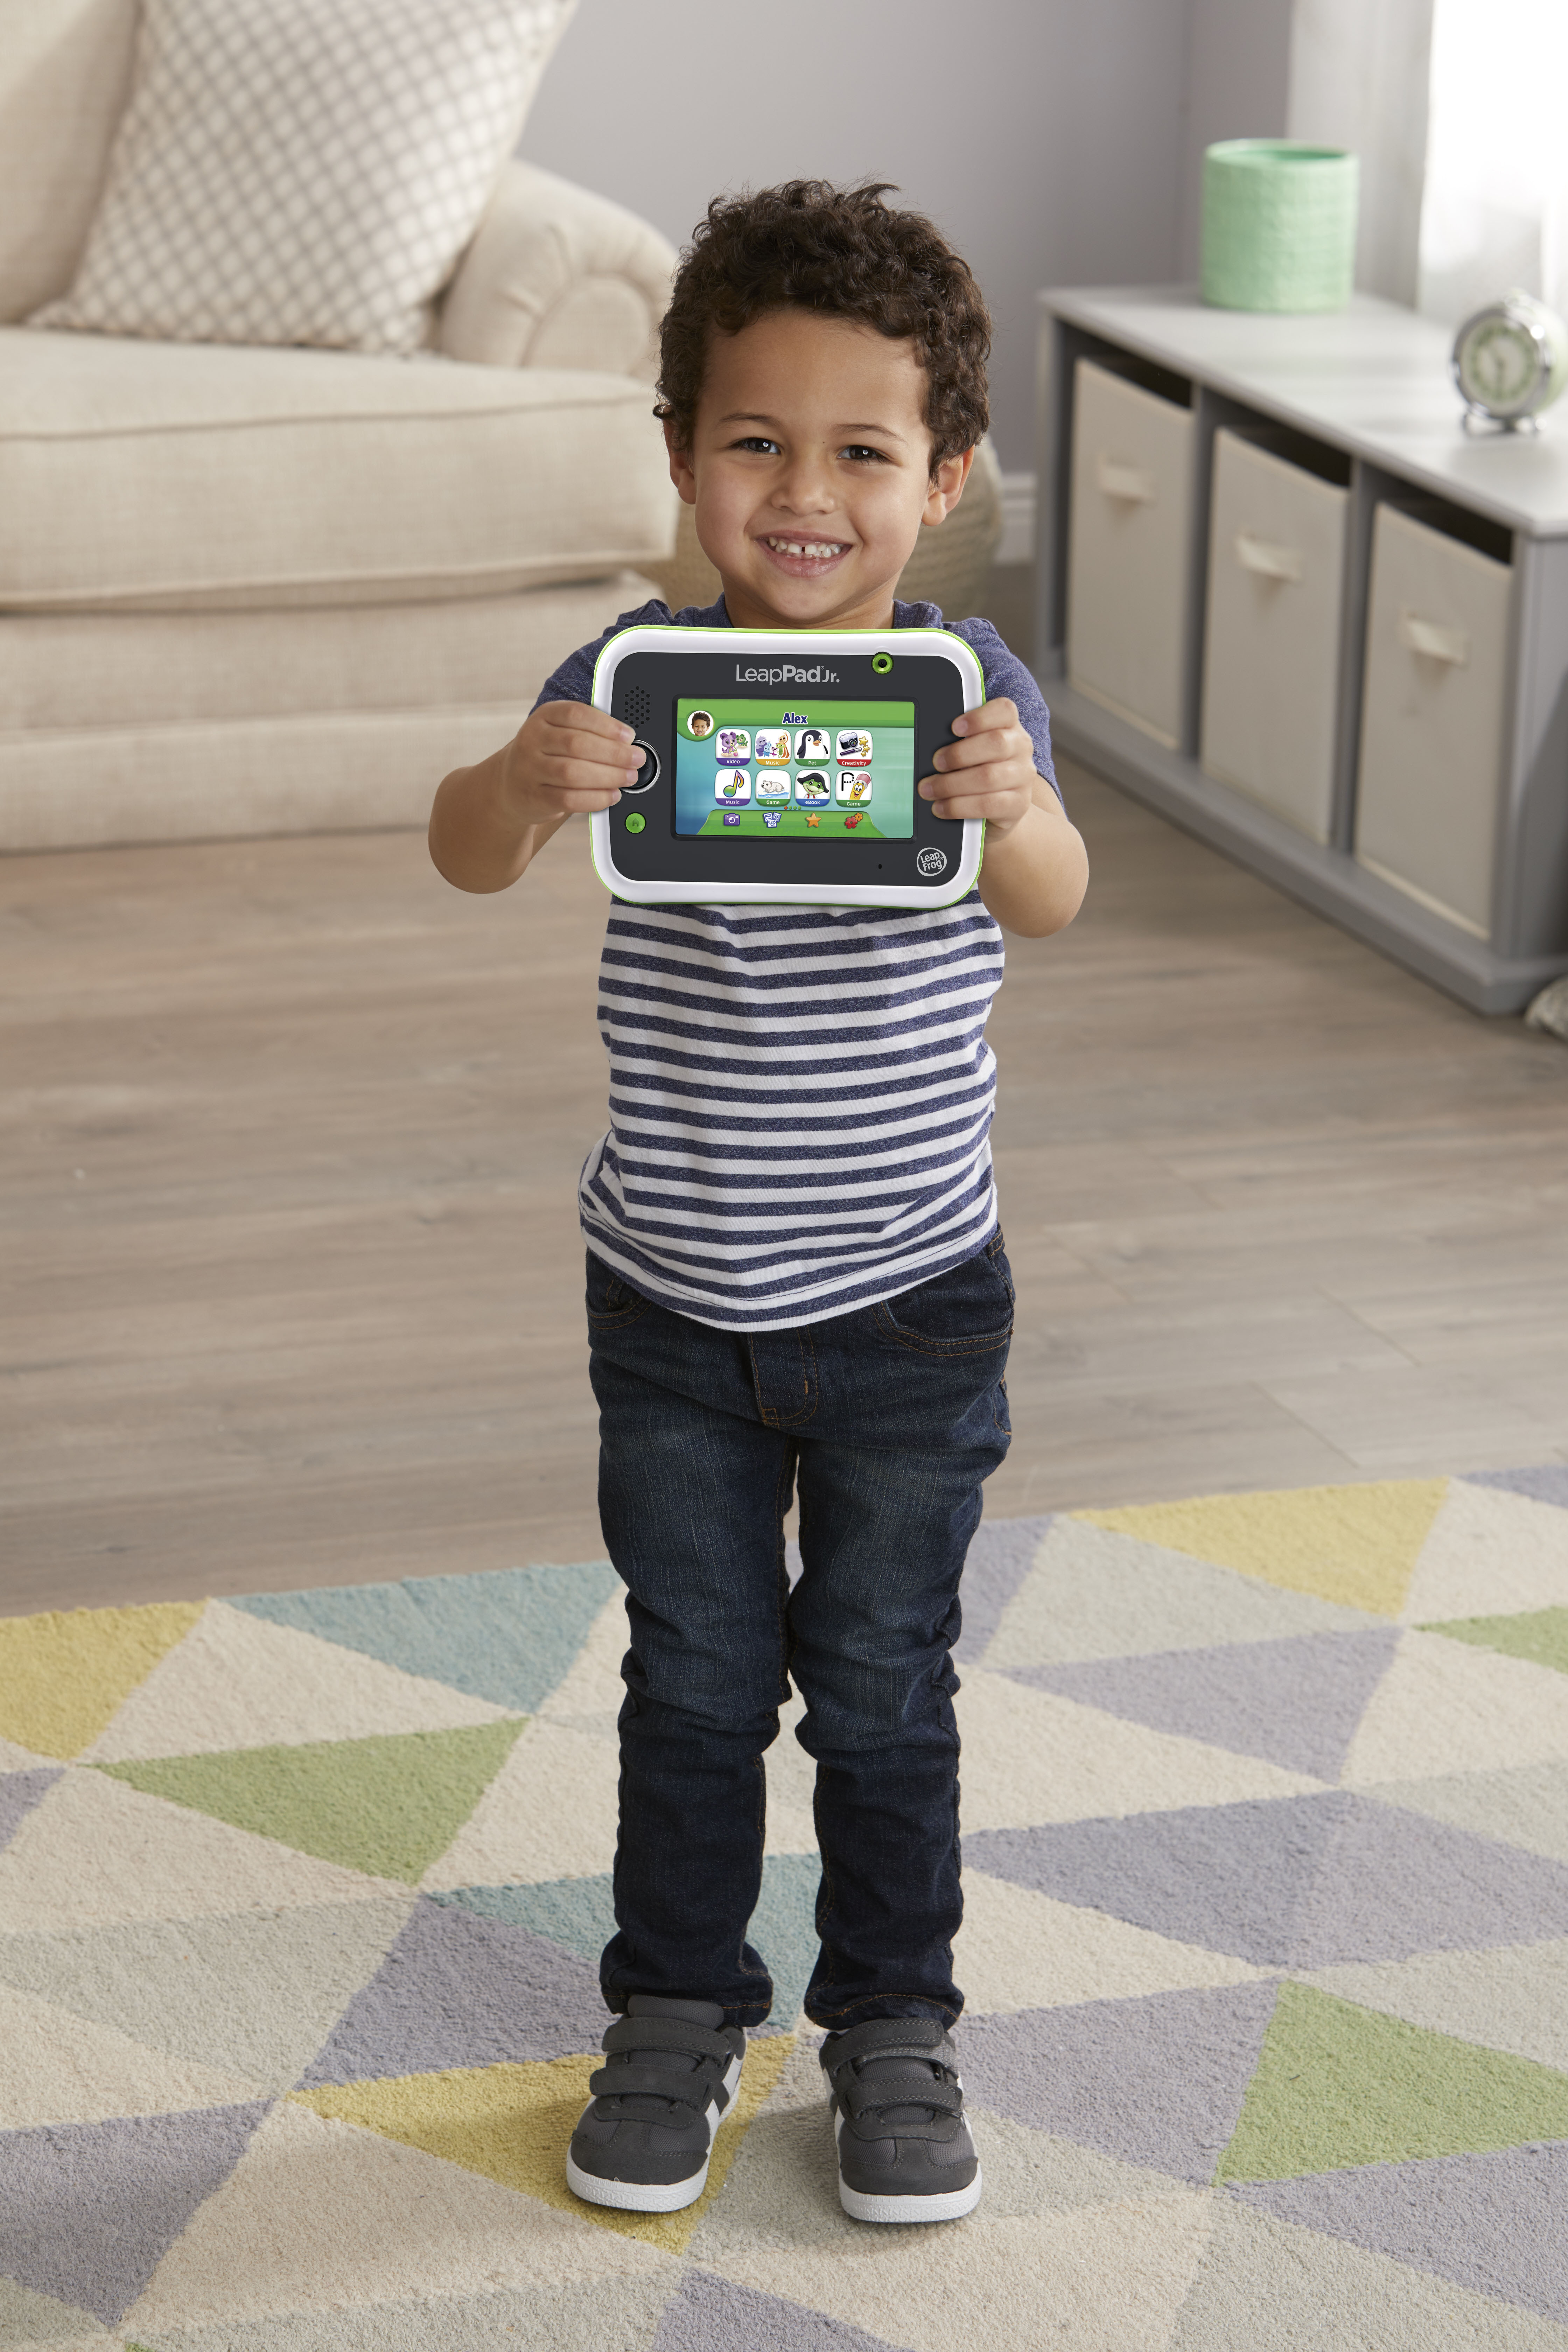 LeapFrog LeapPad Jr. Kid-Friendly Tablet Packed With Learning Games and Apps - image 3 of 10